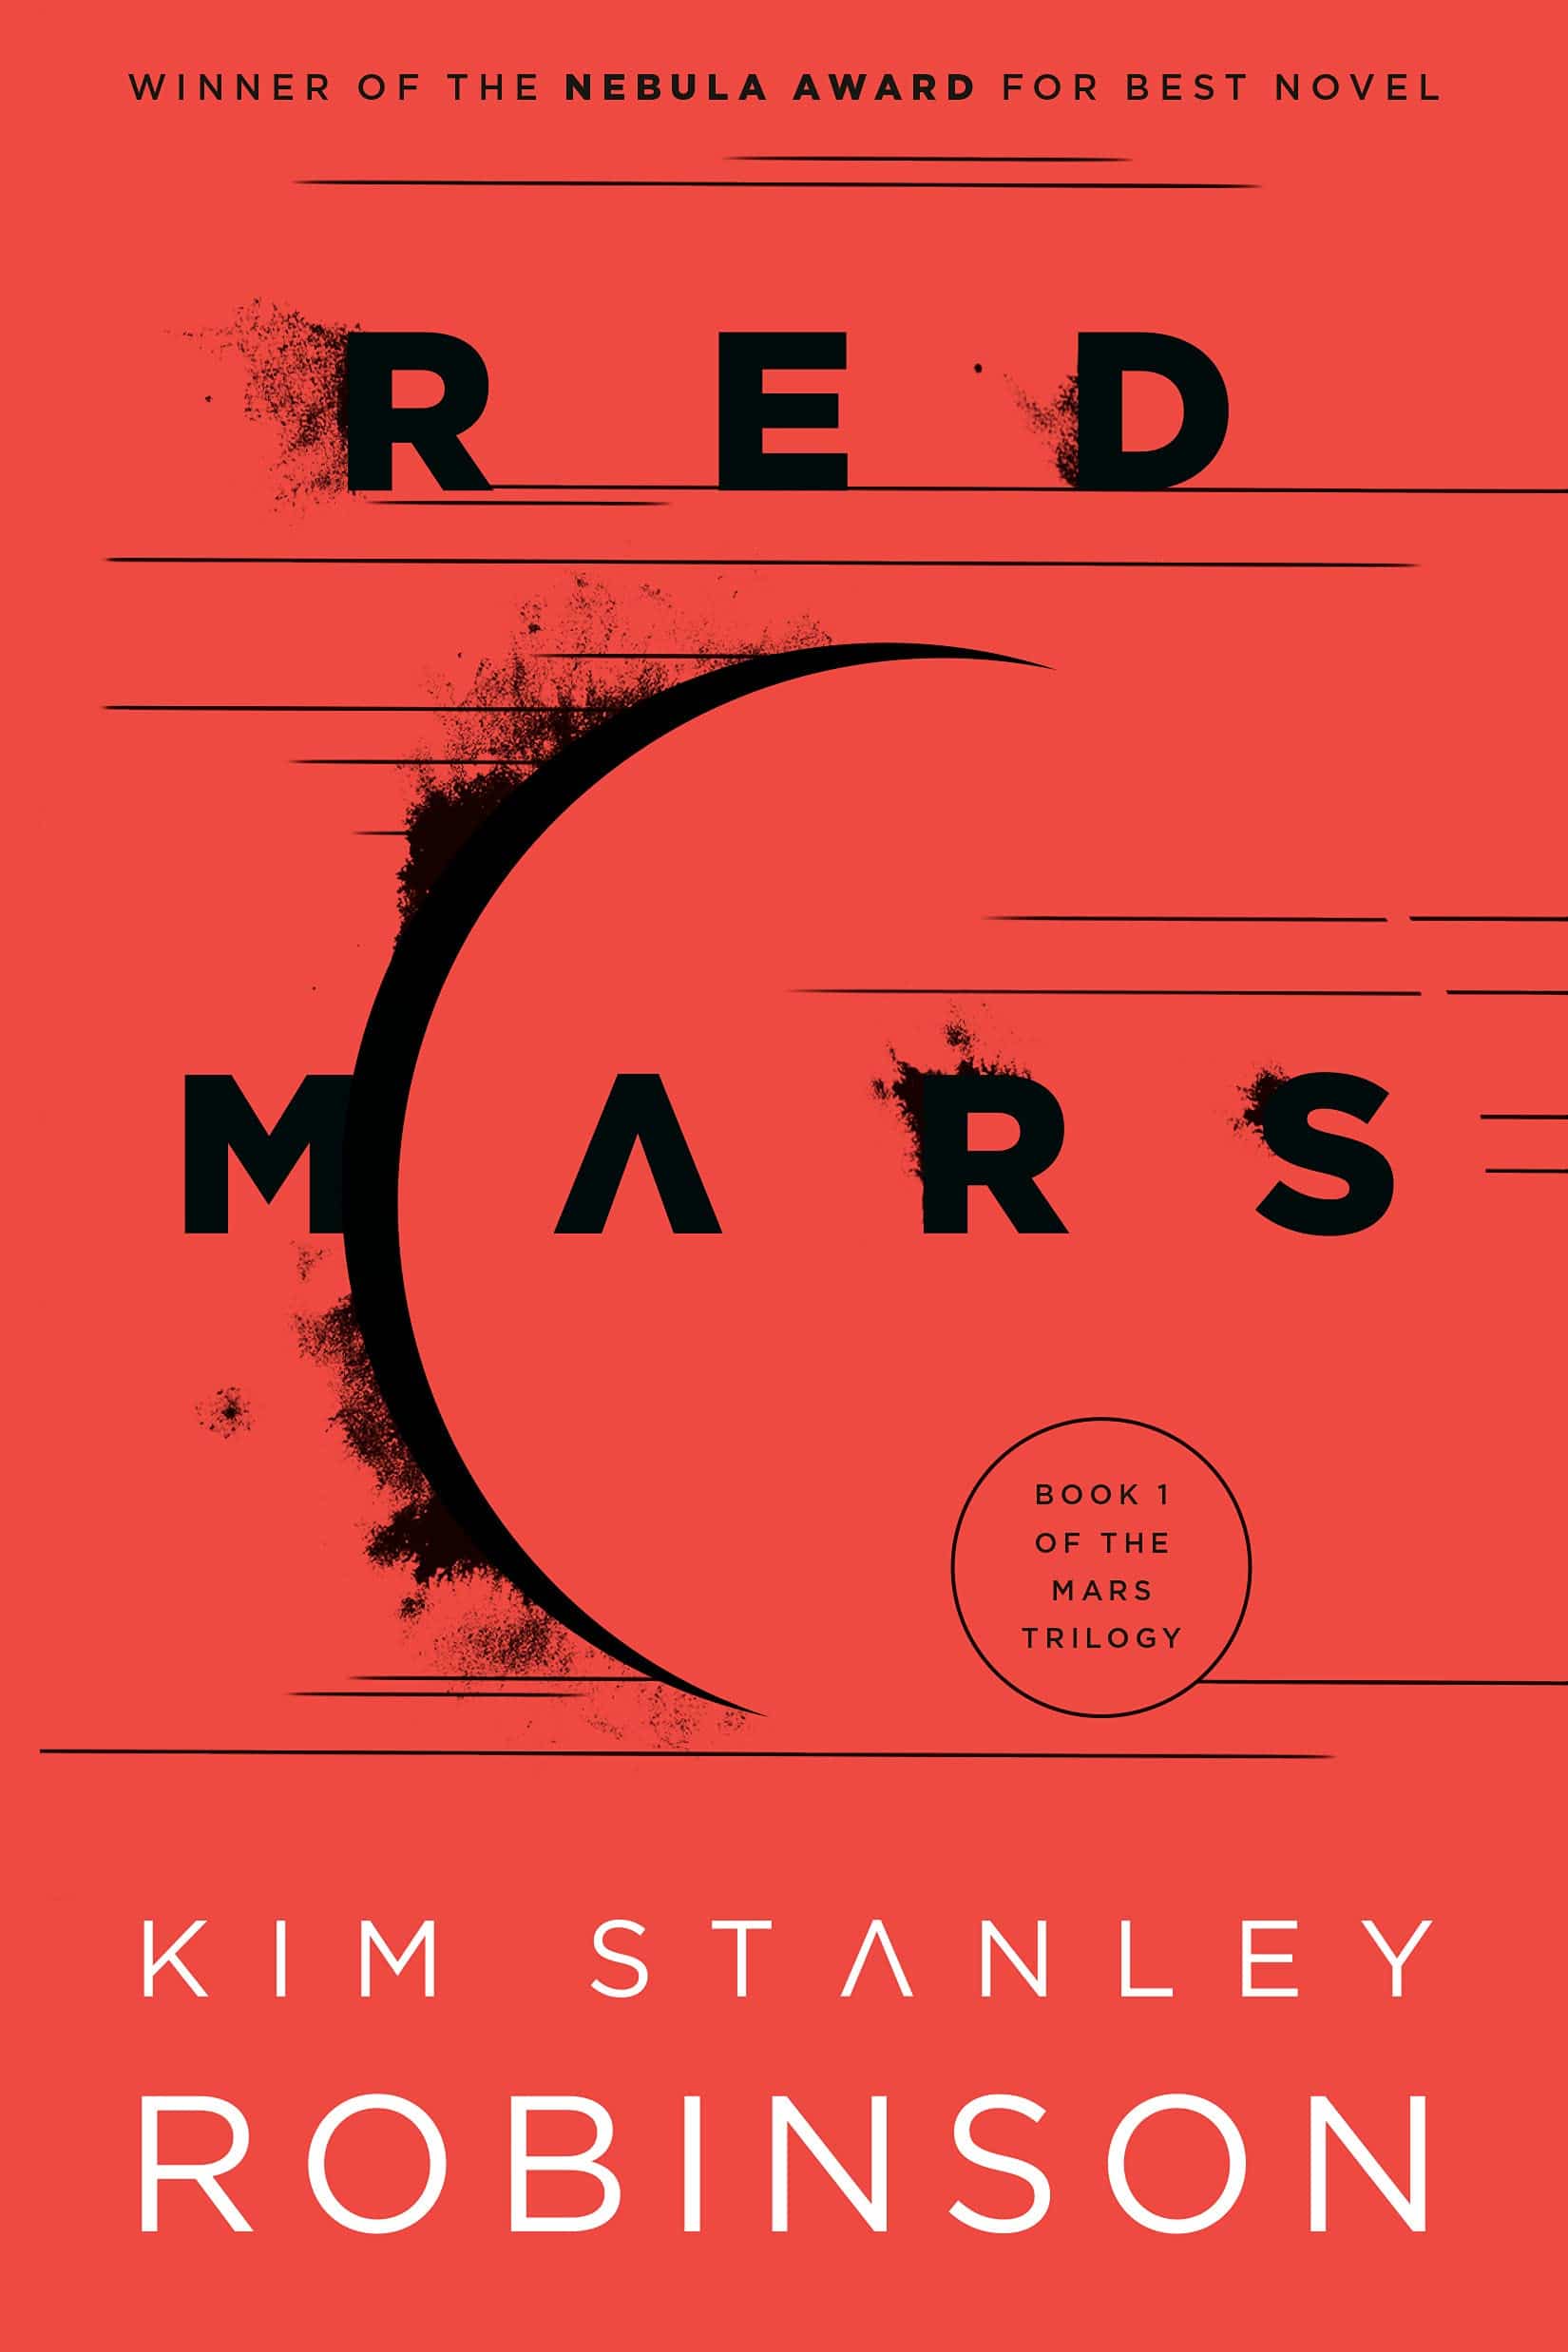 The cover of Red Mars